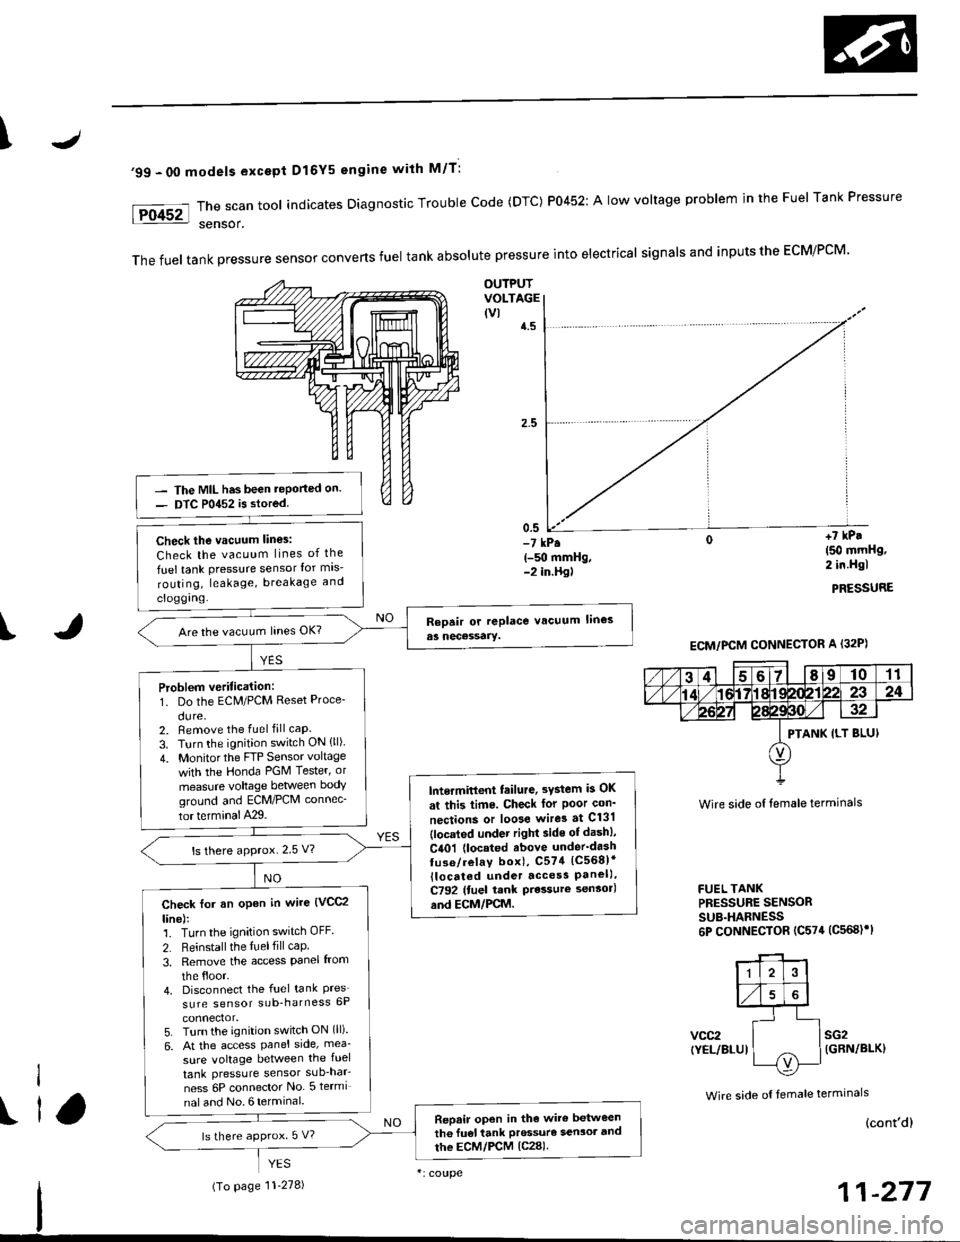 HONDA CIVIC 1998 6.G Owners Guide \
99 - 00 models excepi Dl6Y5 engine with M/T:
The scan tool indicates Diagnostic Trouble Code (DTC) P0452: A low voltage problem in the Fuel Tank Pressure
sensor.
The fuel tank pressure sensor conve